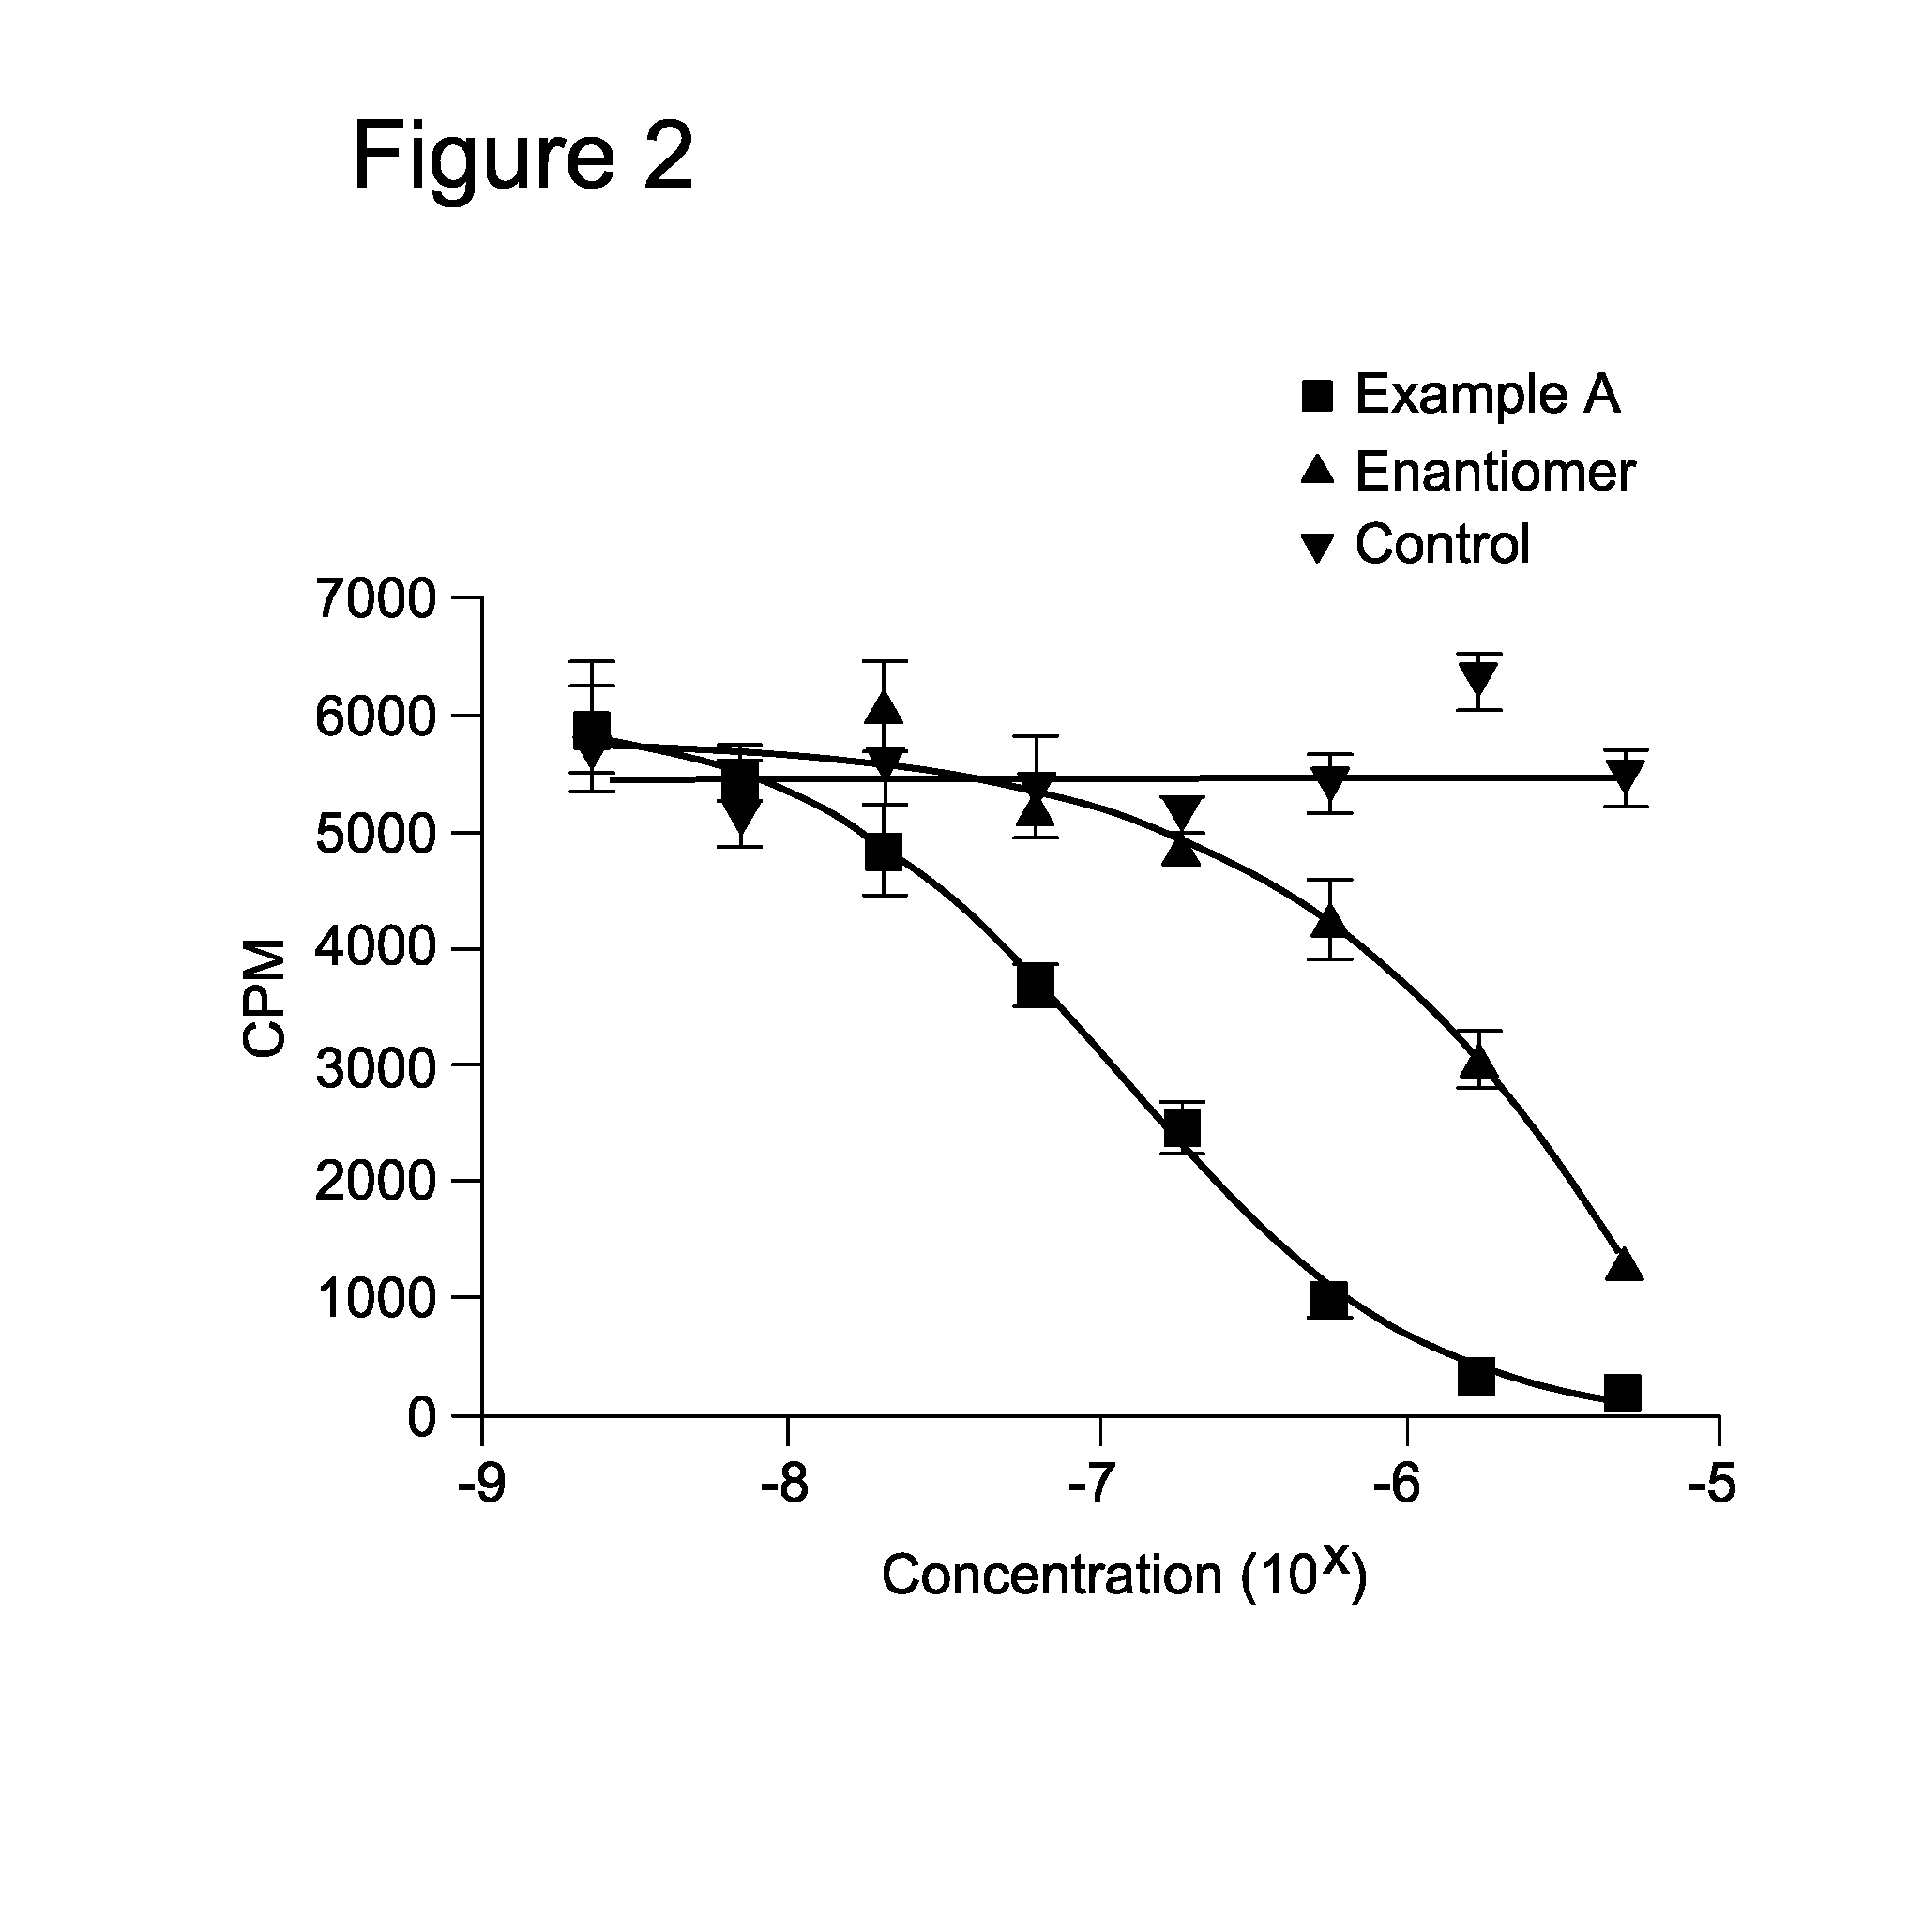 Method of preventing or treating organ, hematopoietic stem cell or bone marrow transplant rejection